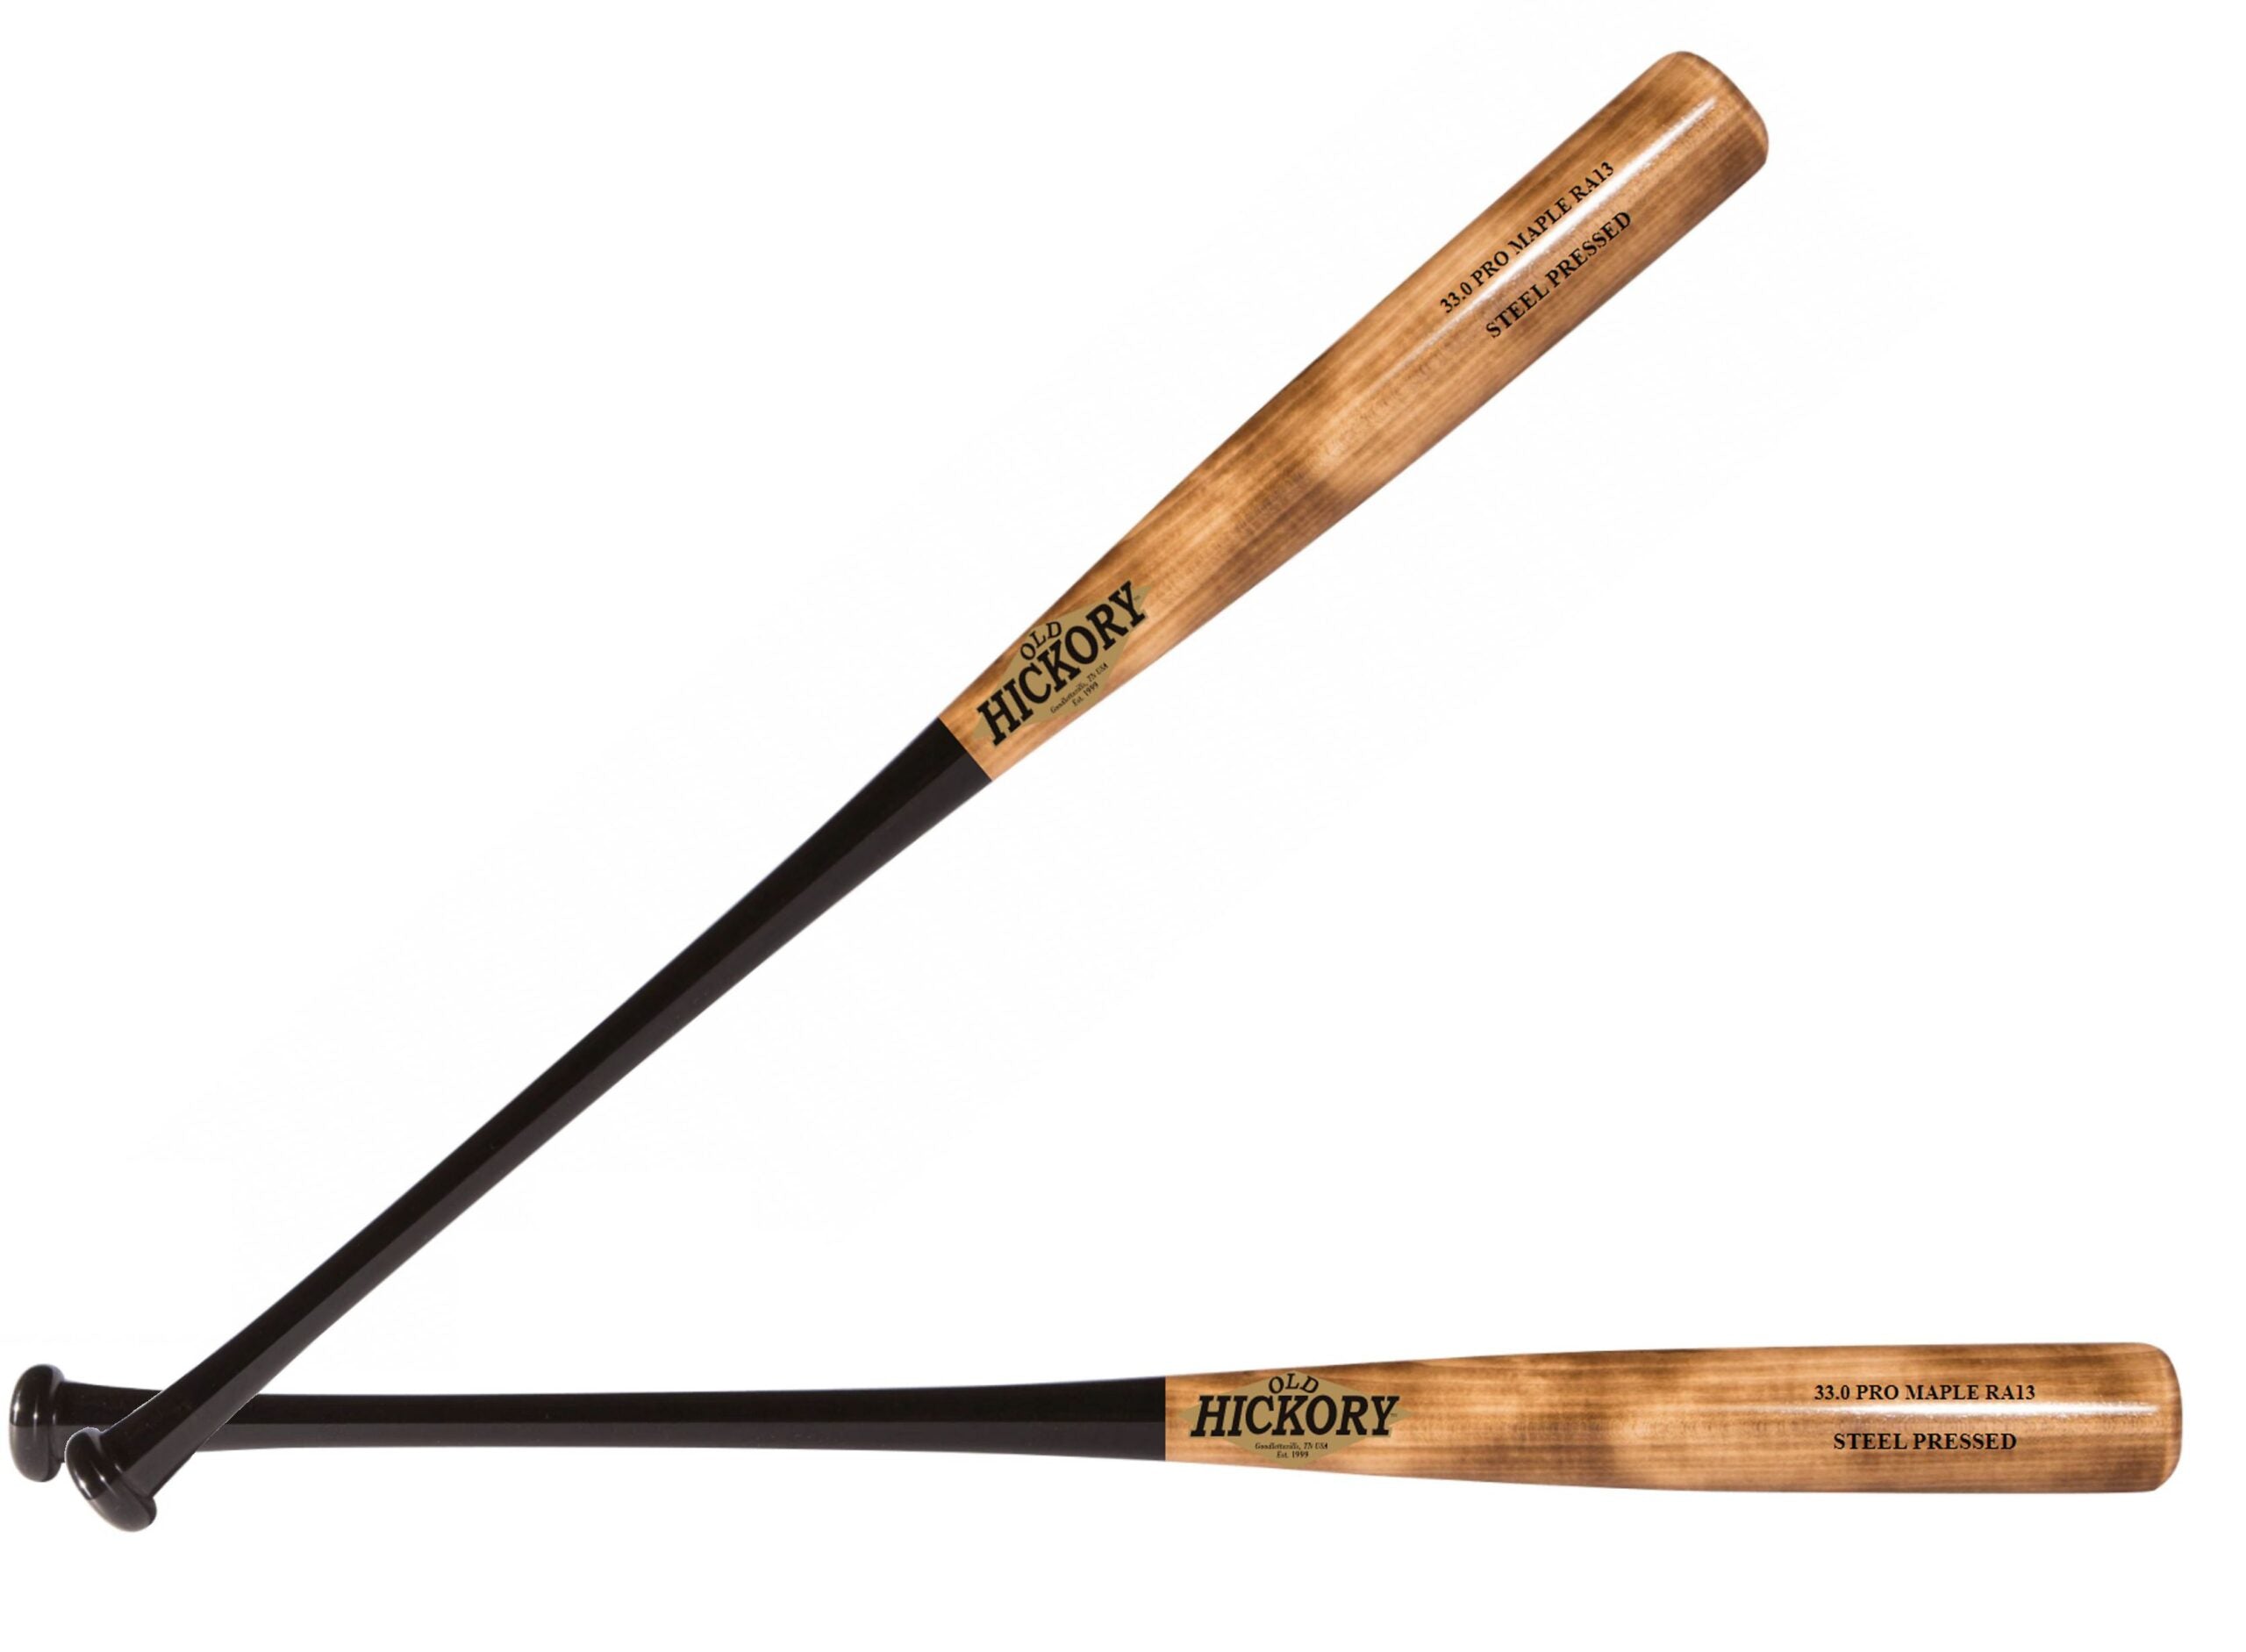 Old Hickory RA13 Pro Maple Steel Pressed